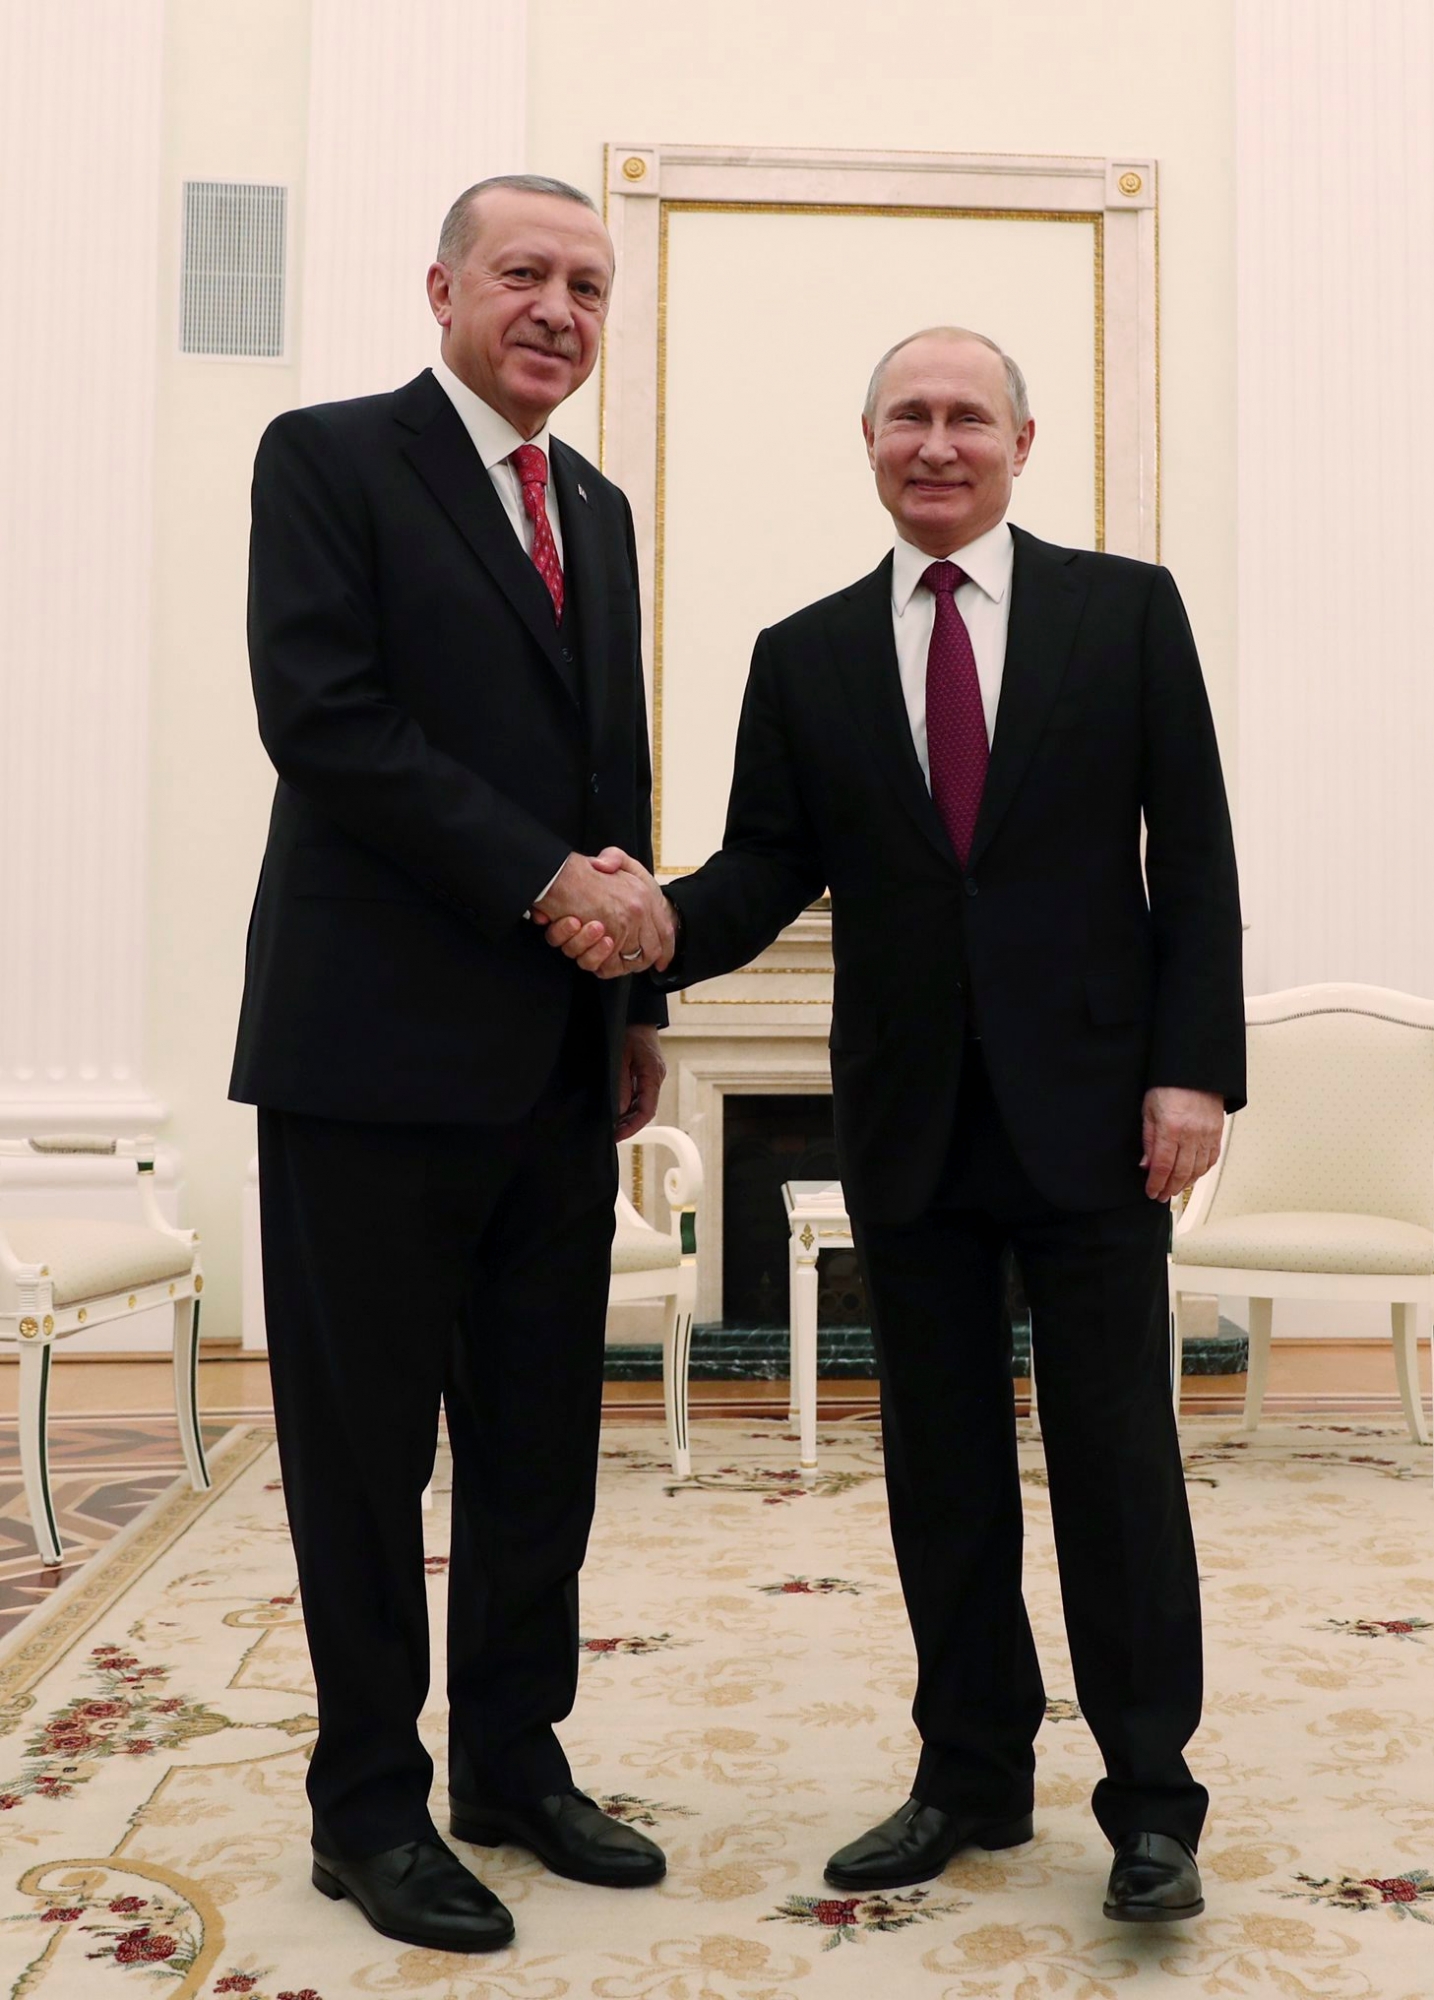 Turkey's President Recep Tayyip Erdogan, left, shakes hands with Russia's President Vladimir Putin, right, prior to their meeting in Moscow, Russia, Wednesday, Jan. 23, 2019. (Presidential Press Service via AP, Pool) Russia Turkey